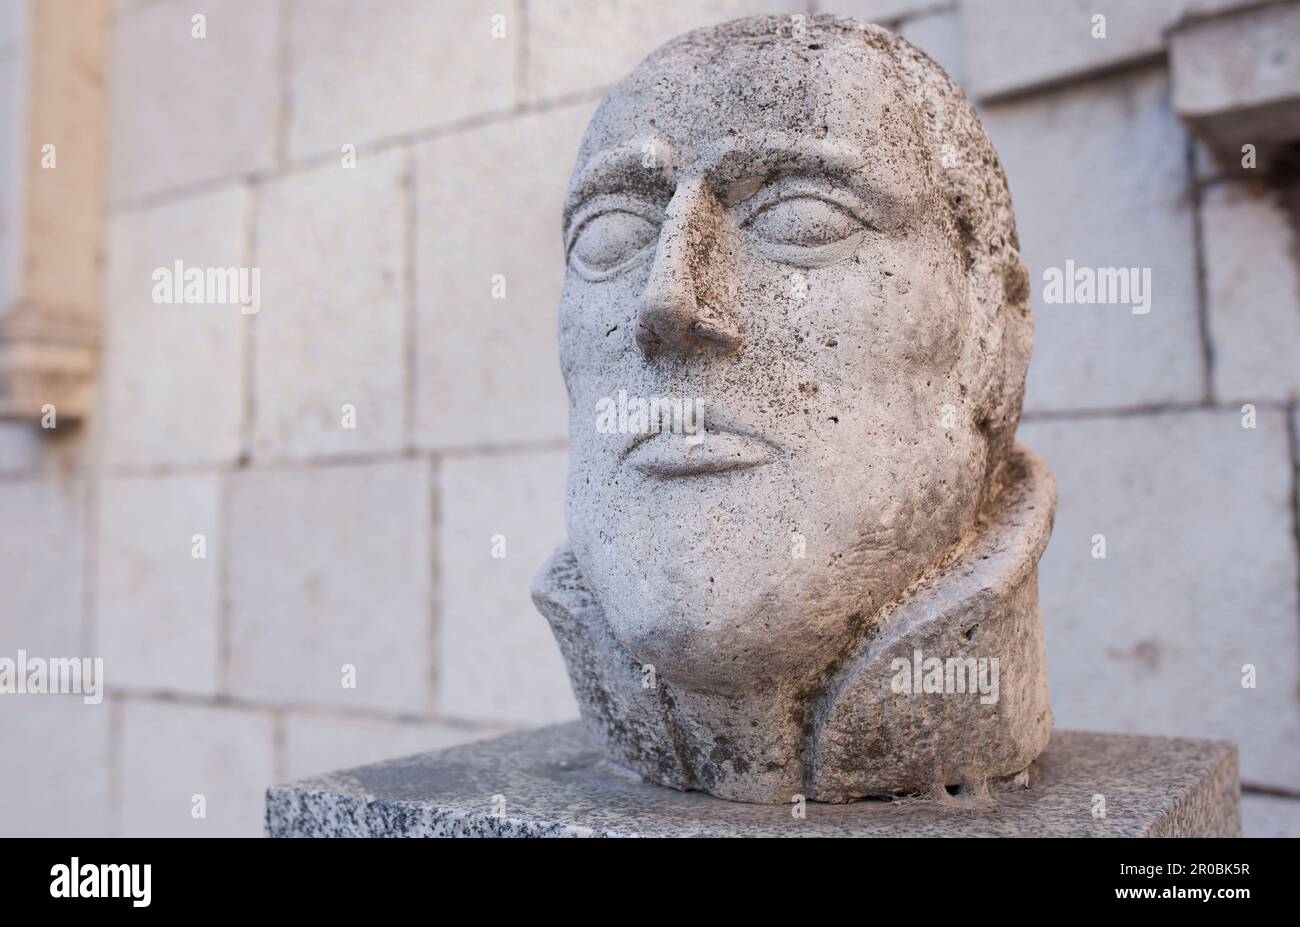 Valladolid, Spain - July 18th, 2020: Juan Ponce de Leon bust. House Museum of Columbus and research centre for American history, Valladolid, Spain Stock Photo